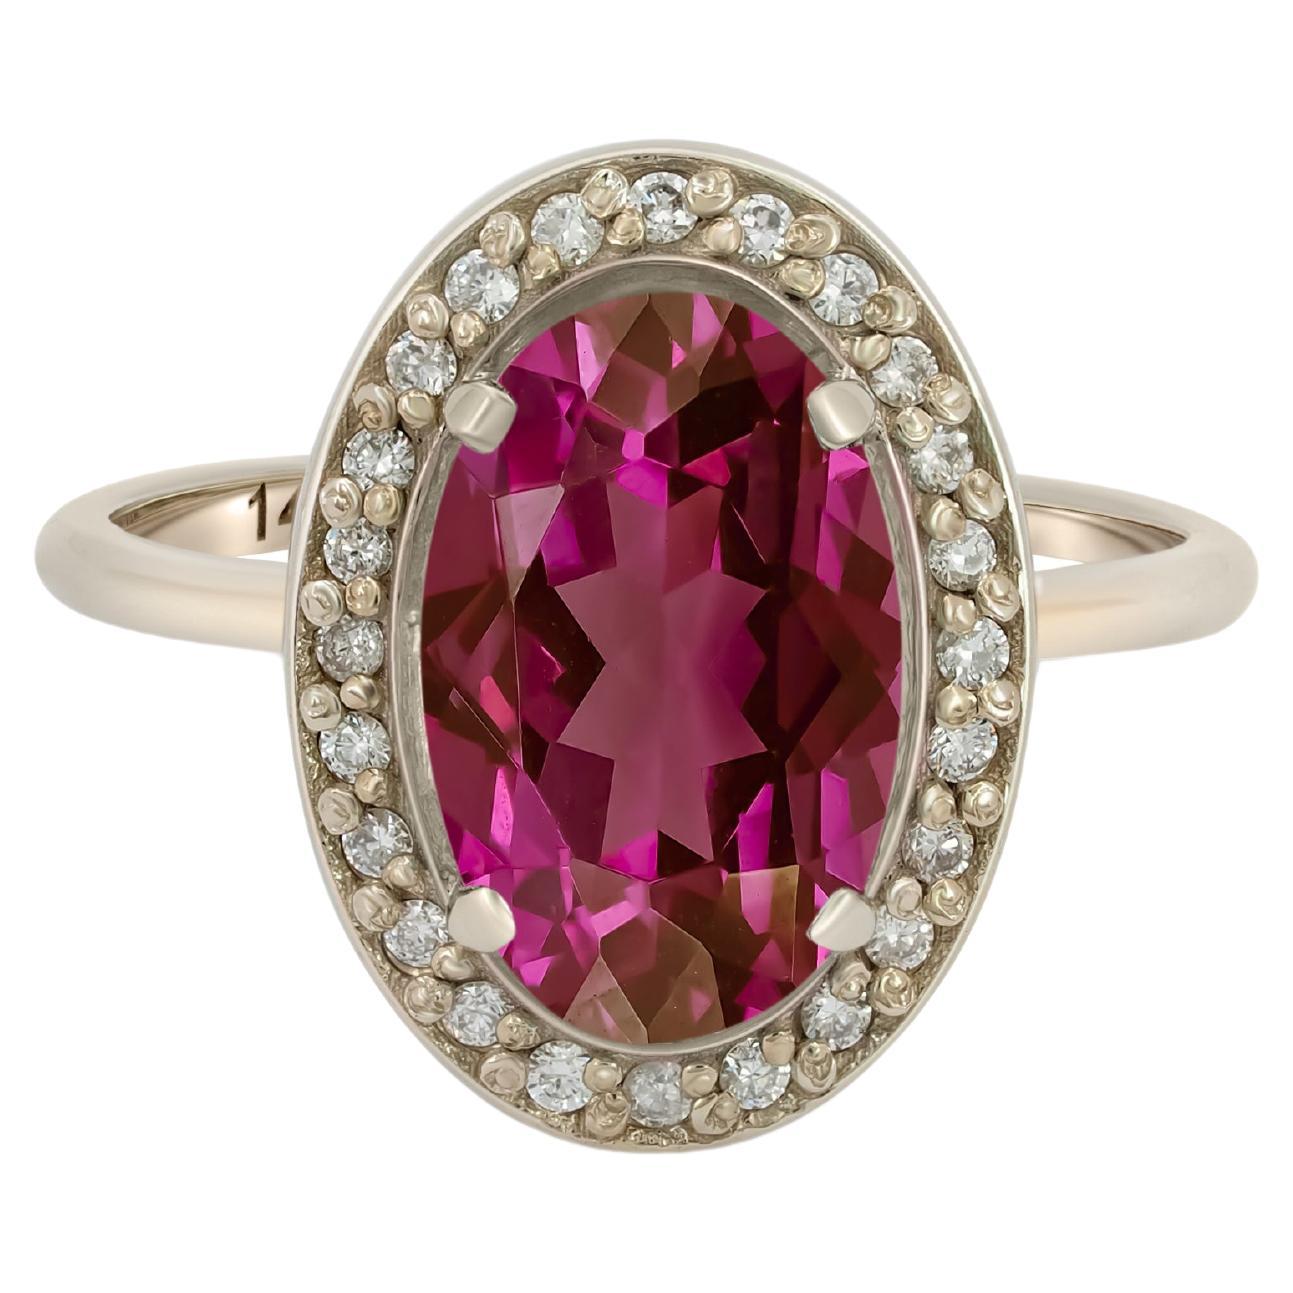 For Sale:  Ruby and diamonds 14k gold ring.